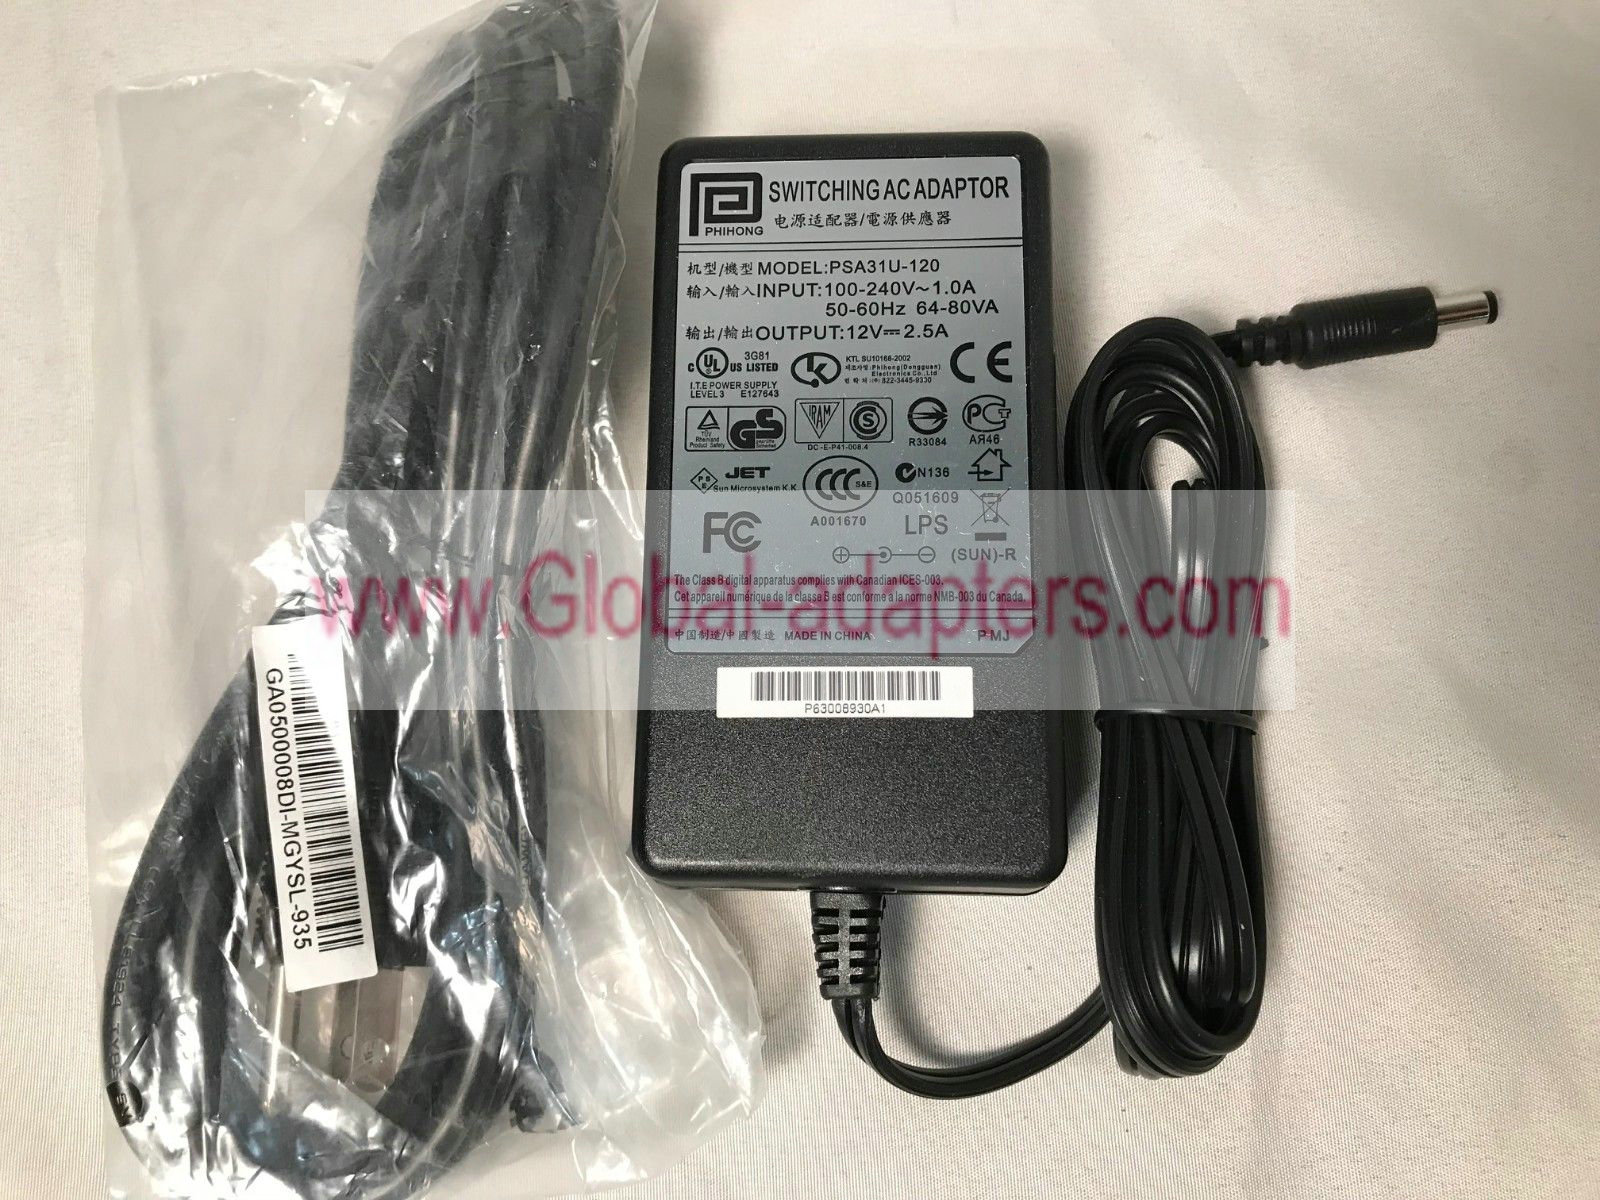 New Genuine 12V 2.5A Phihong PSA31U-120 Switching AC Adapter w/ Power Cord